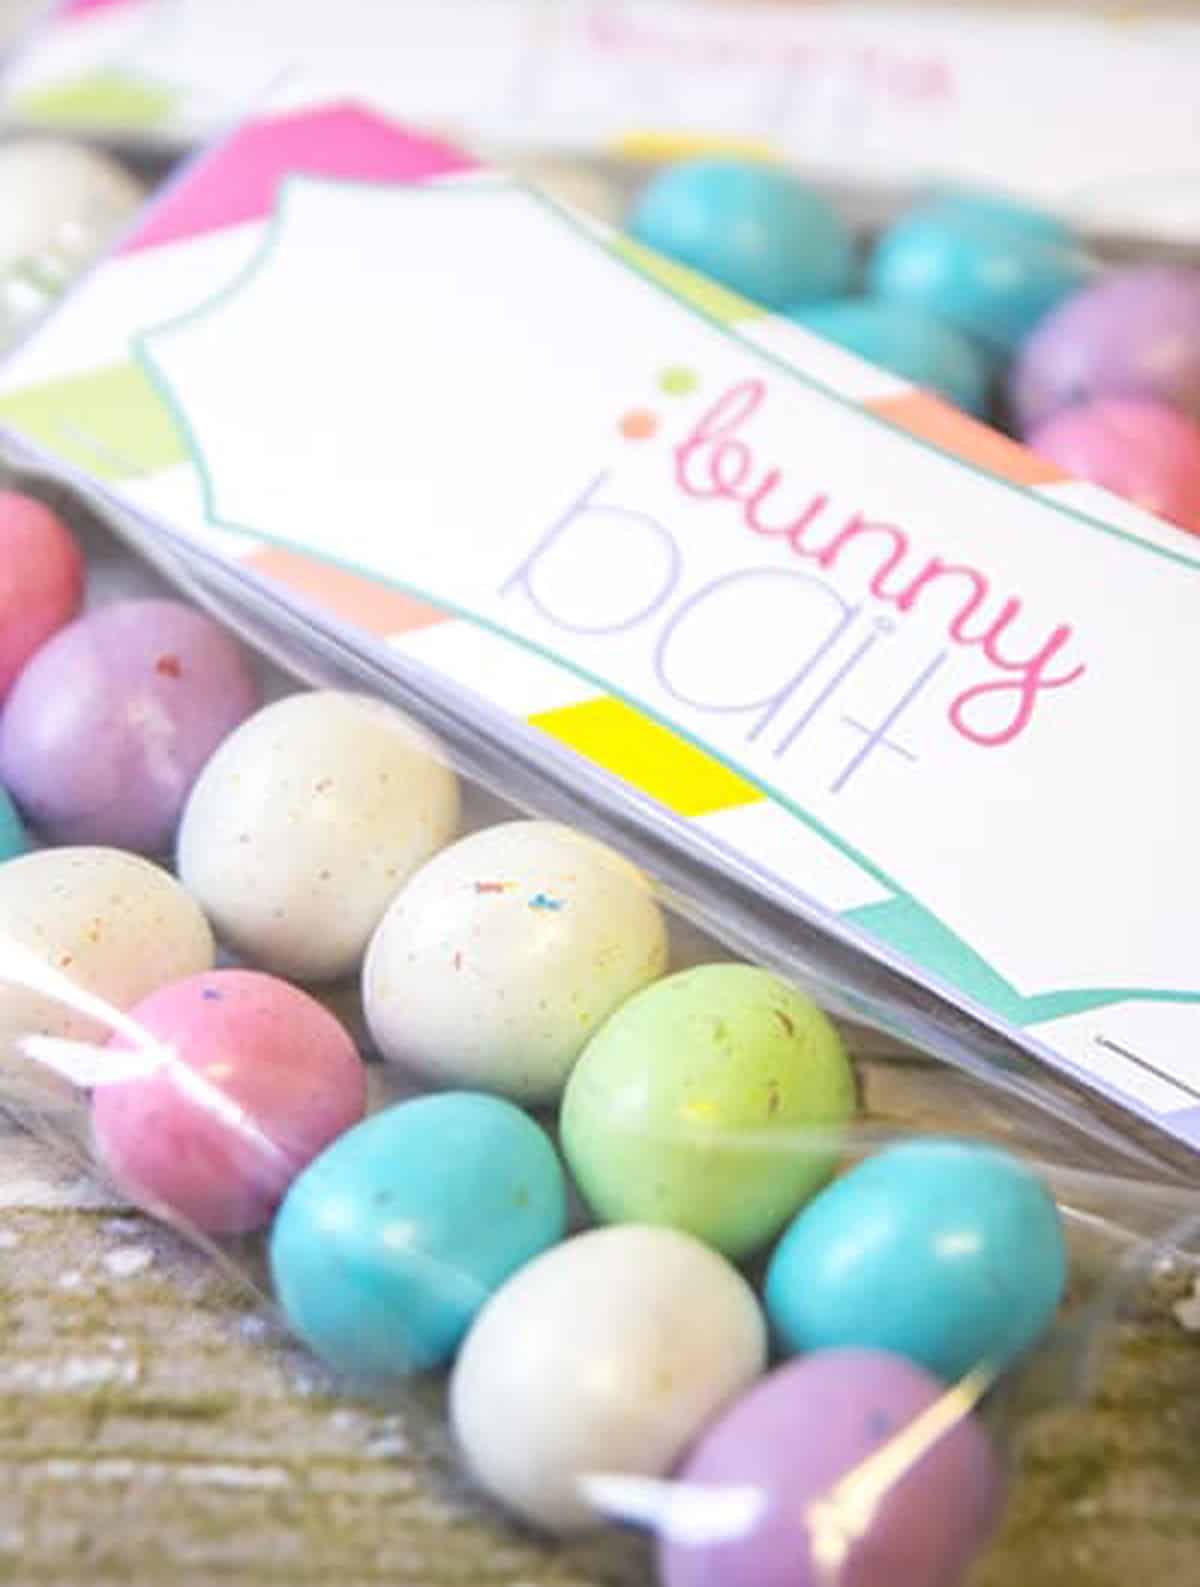 Some malted eggs in clear plastic bags with free printable bunny bait tags.